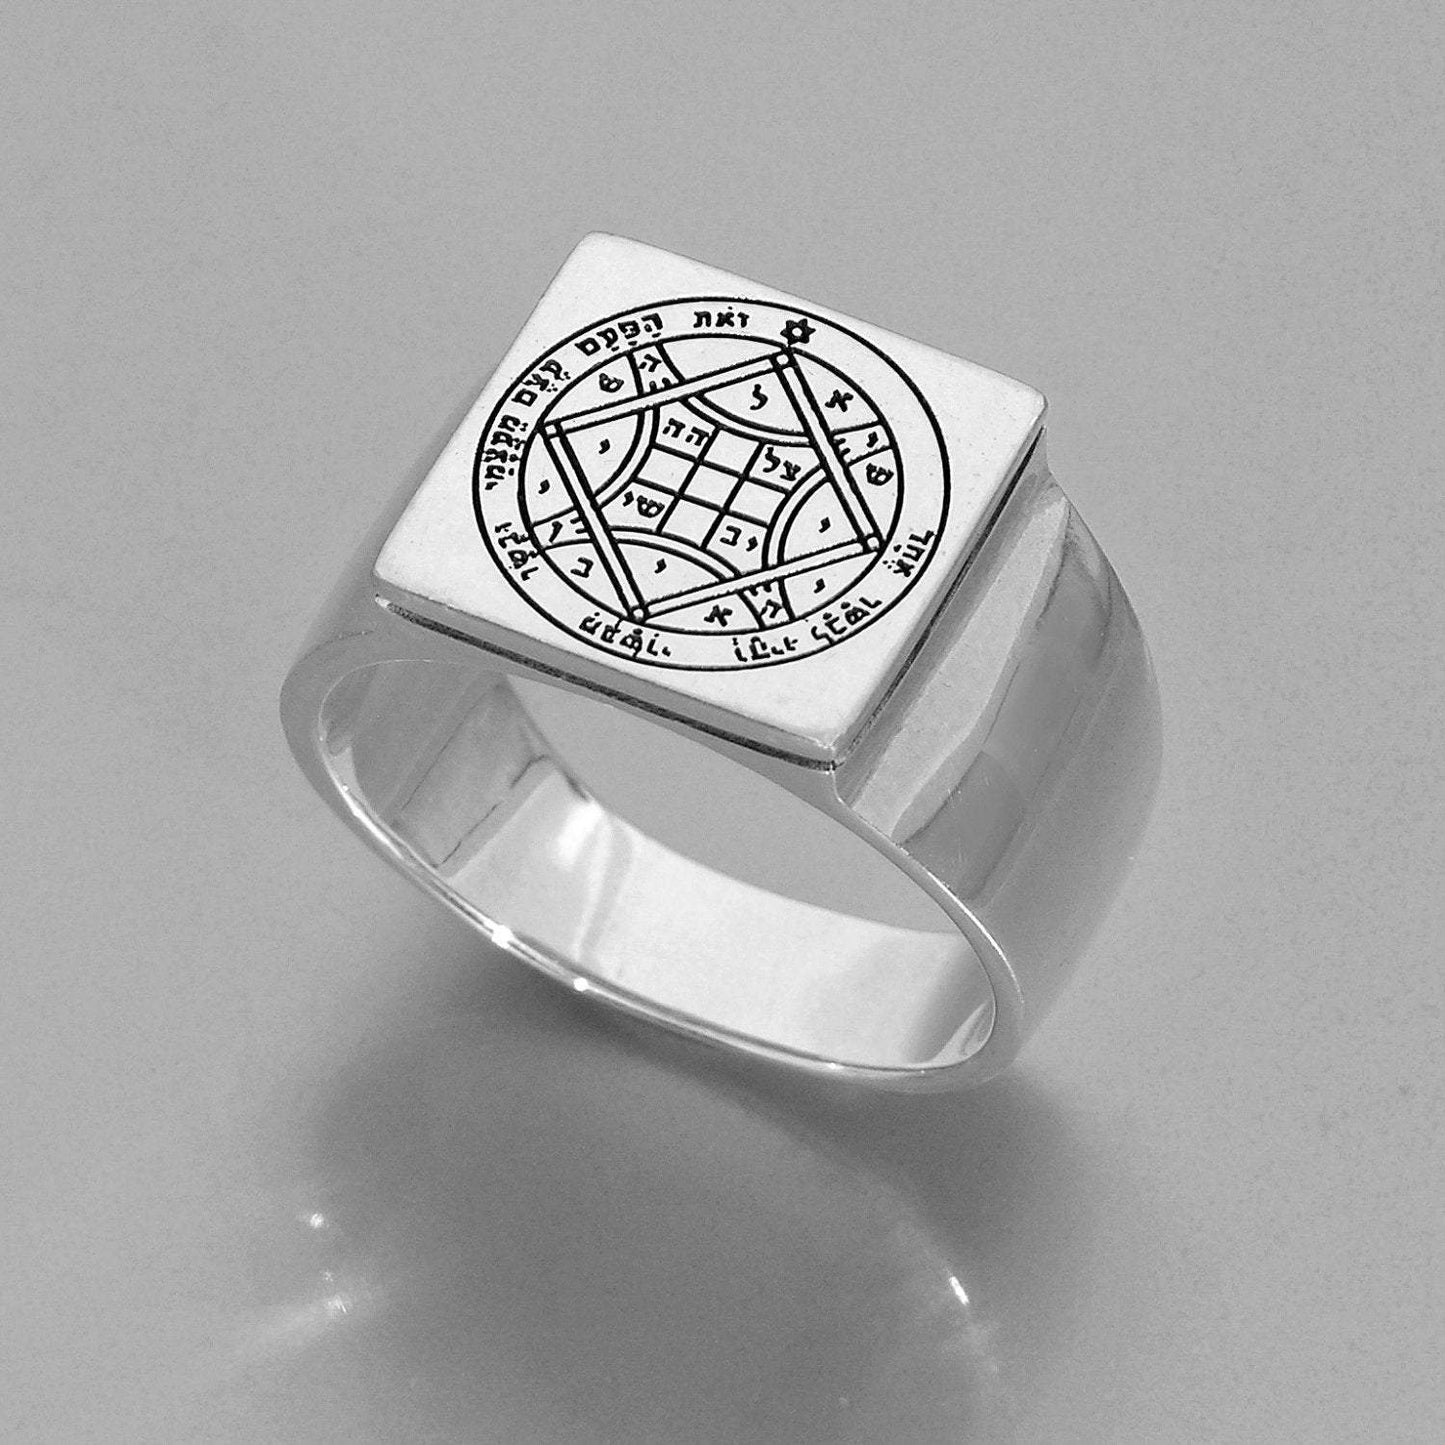 Bluenoemi Jewelry Rings Sterling silver ring . Kabbalah Ring, Love ring, Solomon Love seal , blessing jewelry